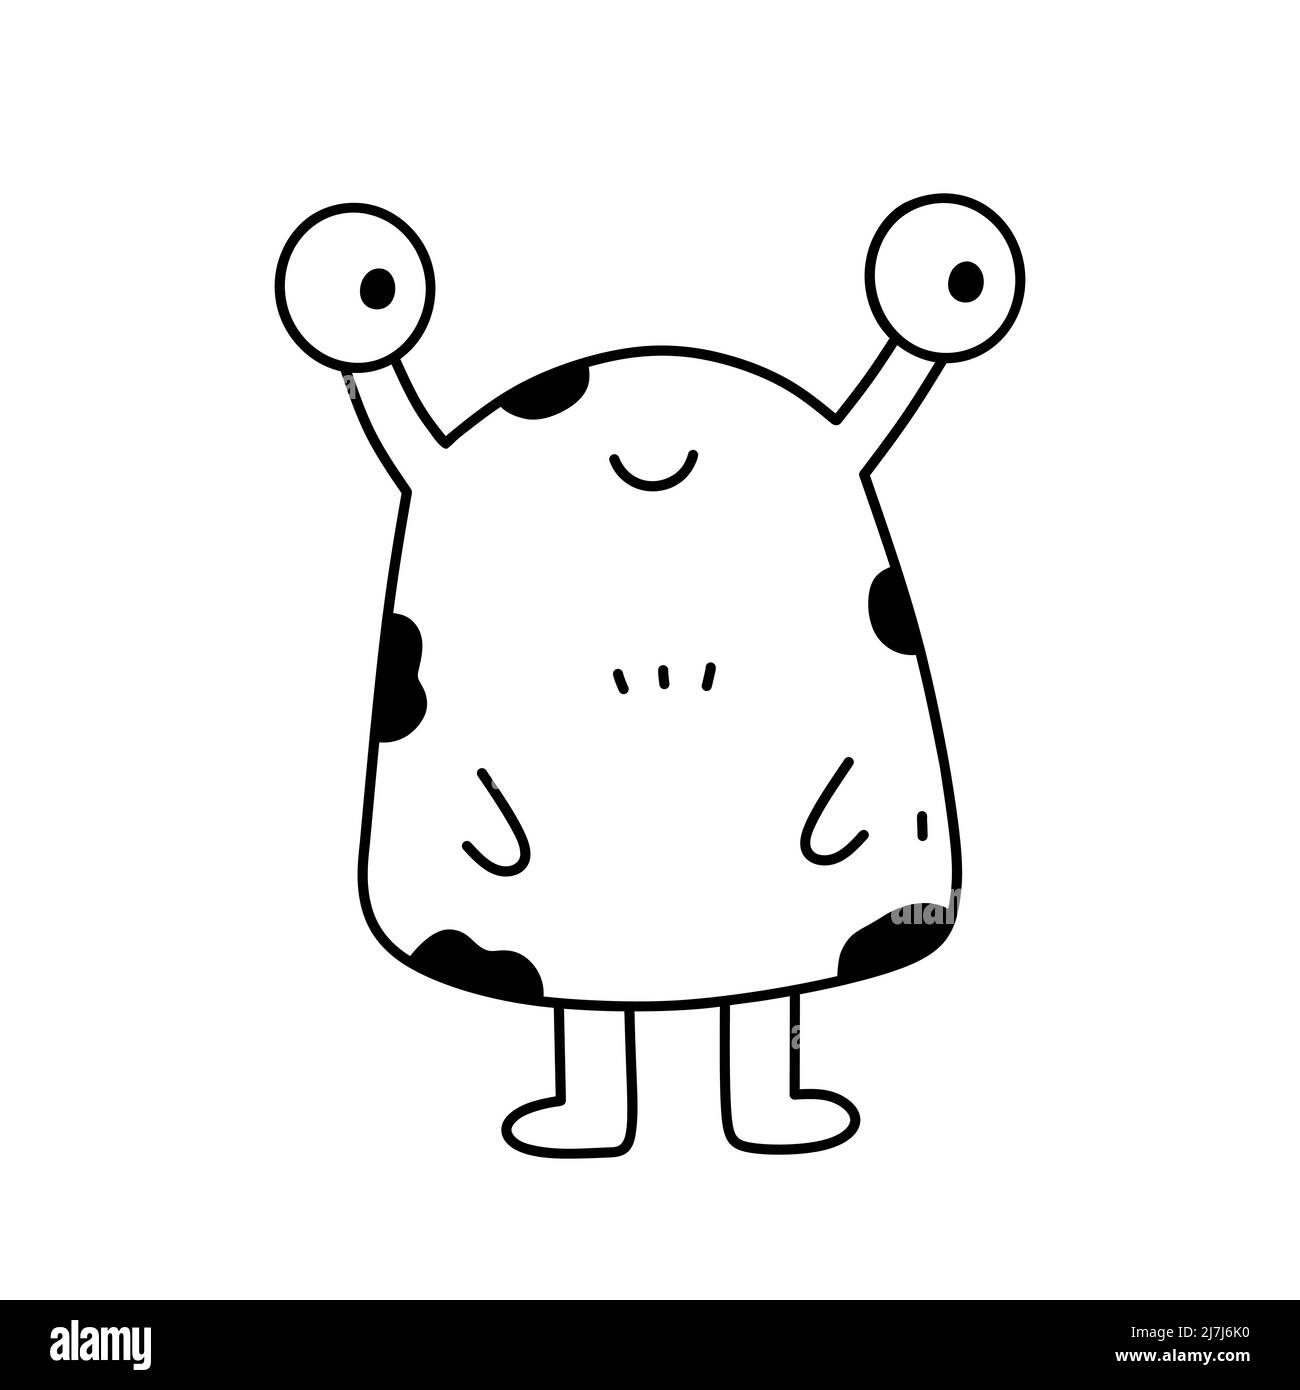 Cute and funny monster isolated on white background. Vector hand-drawn illustration in doodle style. Perfect for Halloween designs, cards, logo, decorations. Cartoon character. Stock Vector